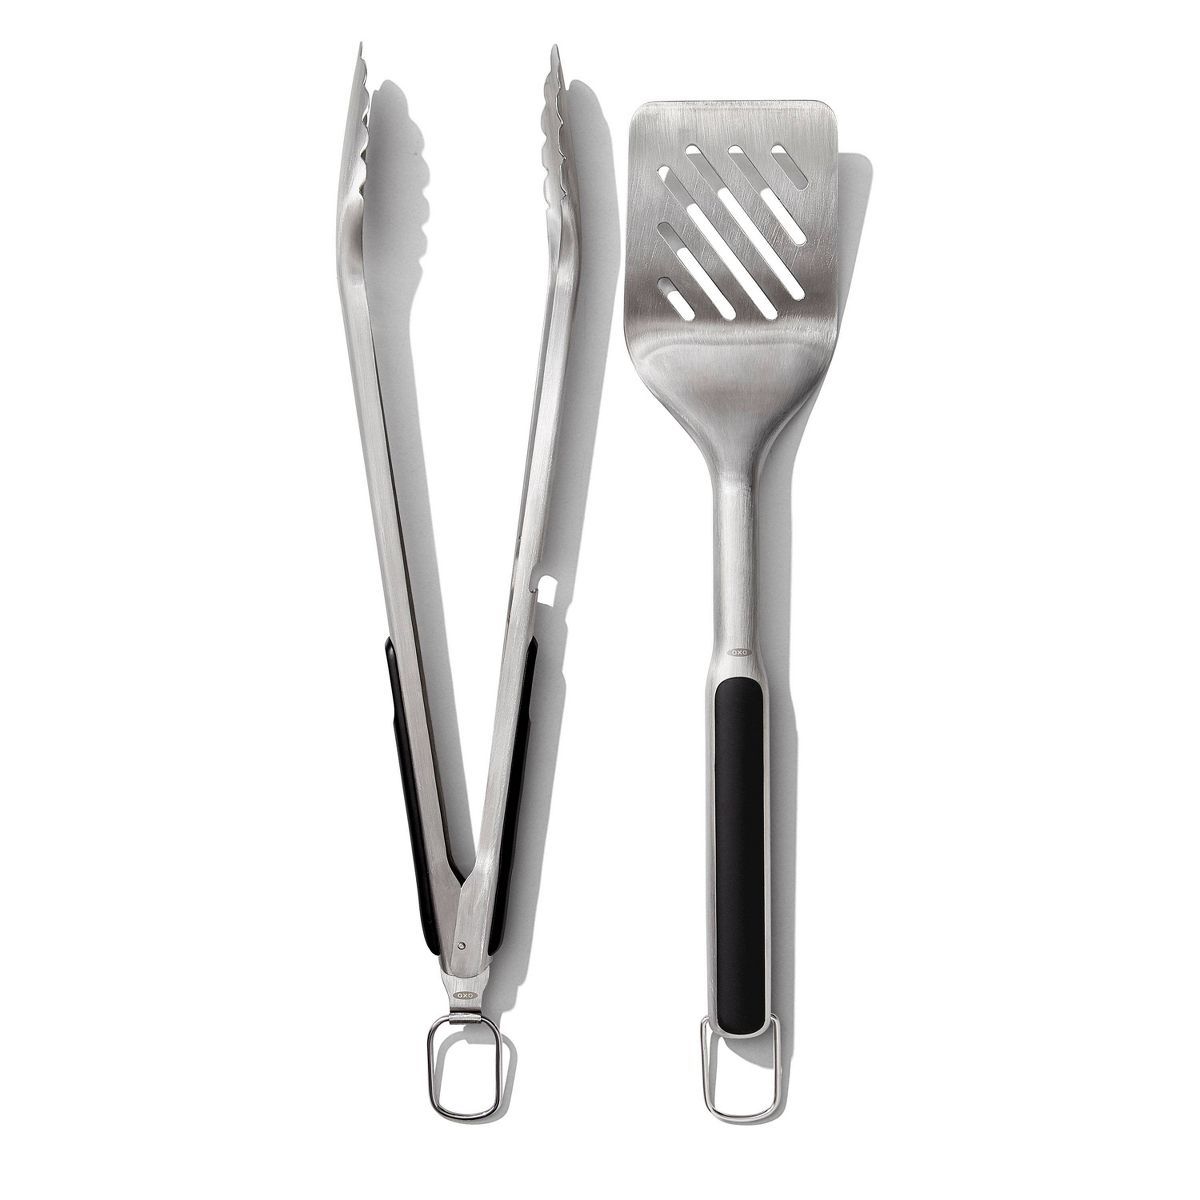 OXO Grilling Turner and Tong Set | Target